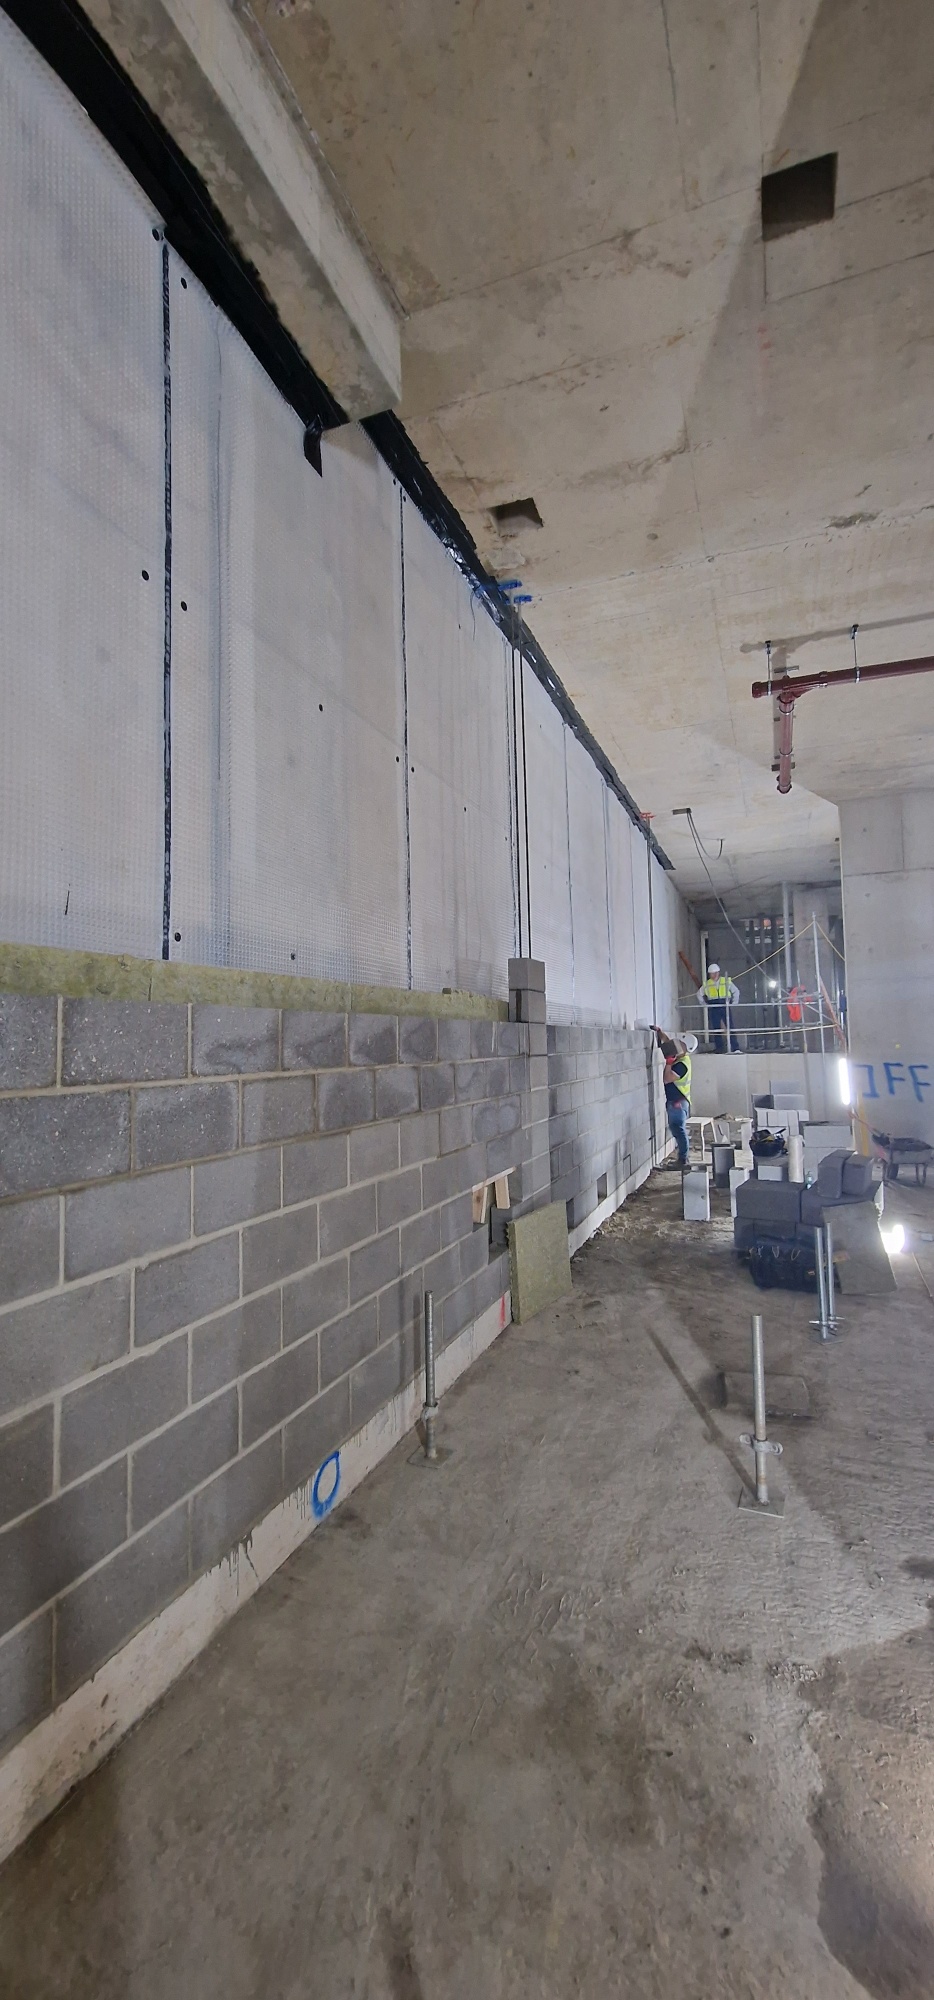 Rascor and Wykamol combine to waterproof the old Odeon cinema site in Kensington with 7000m2 of type c membranes